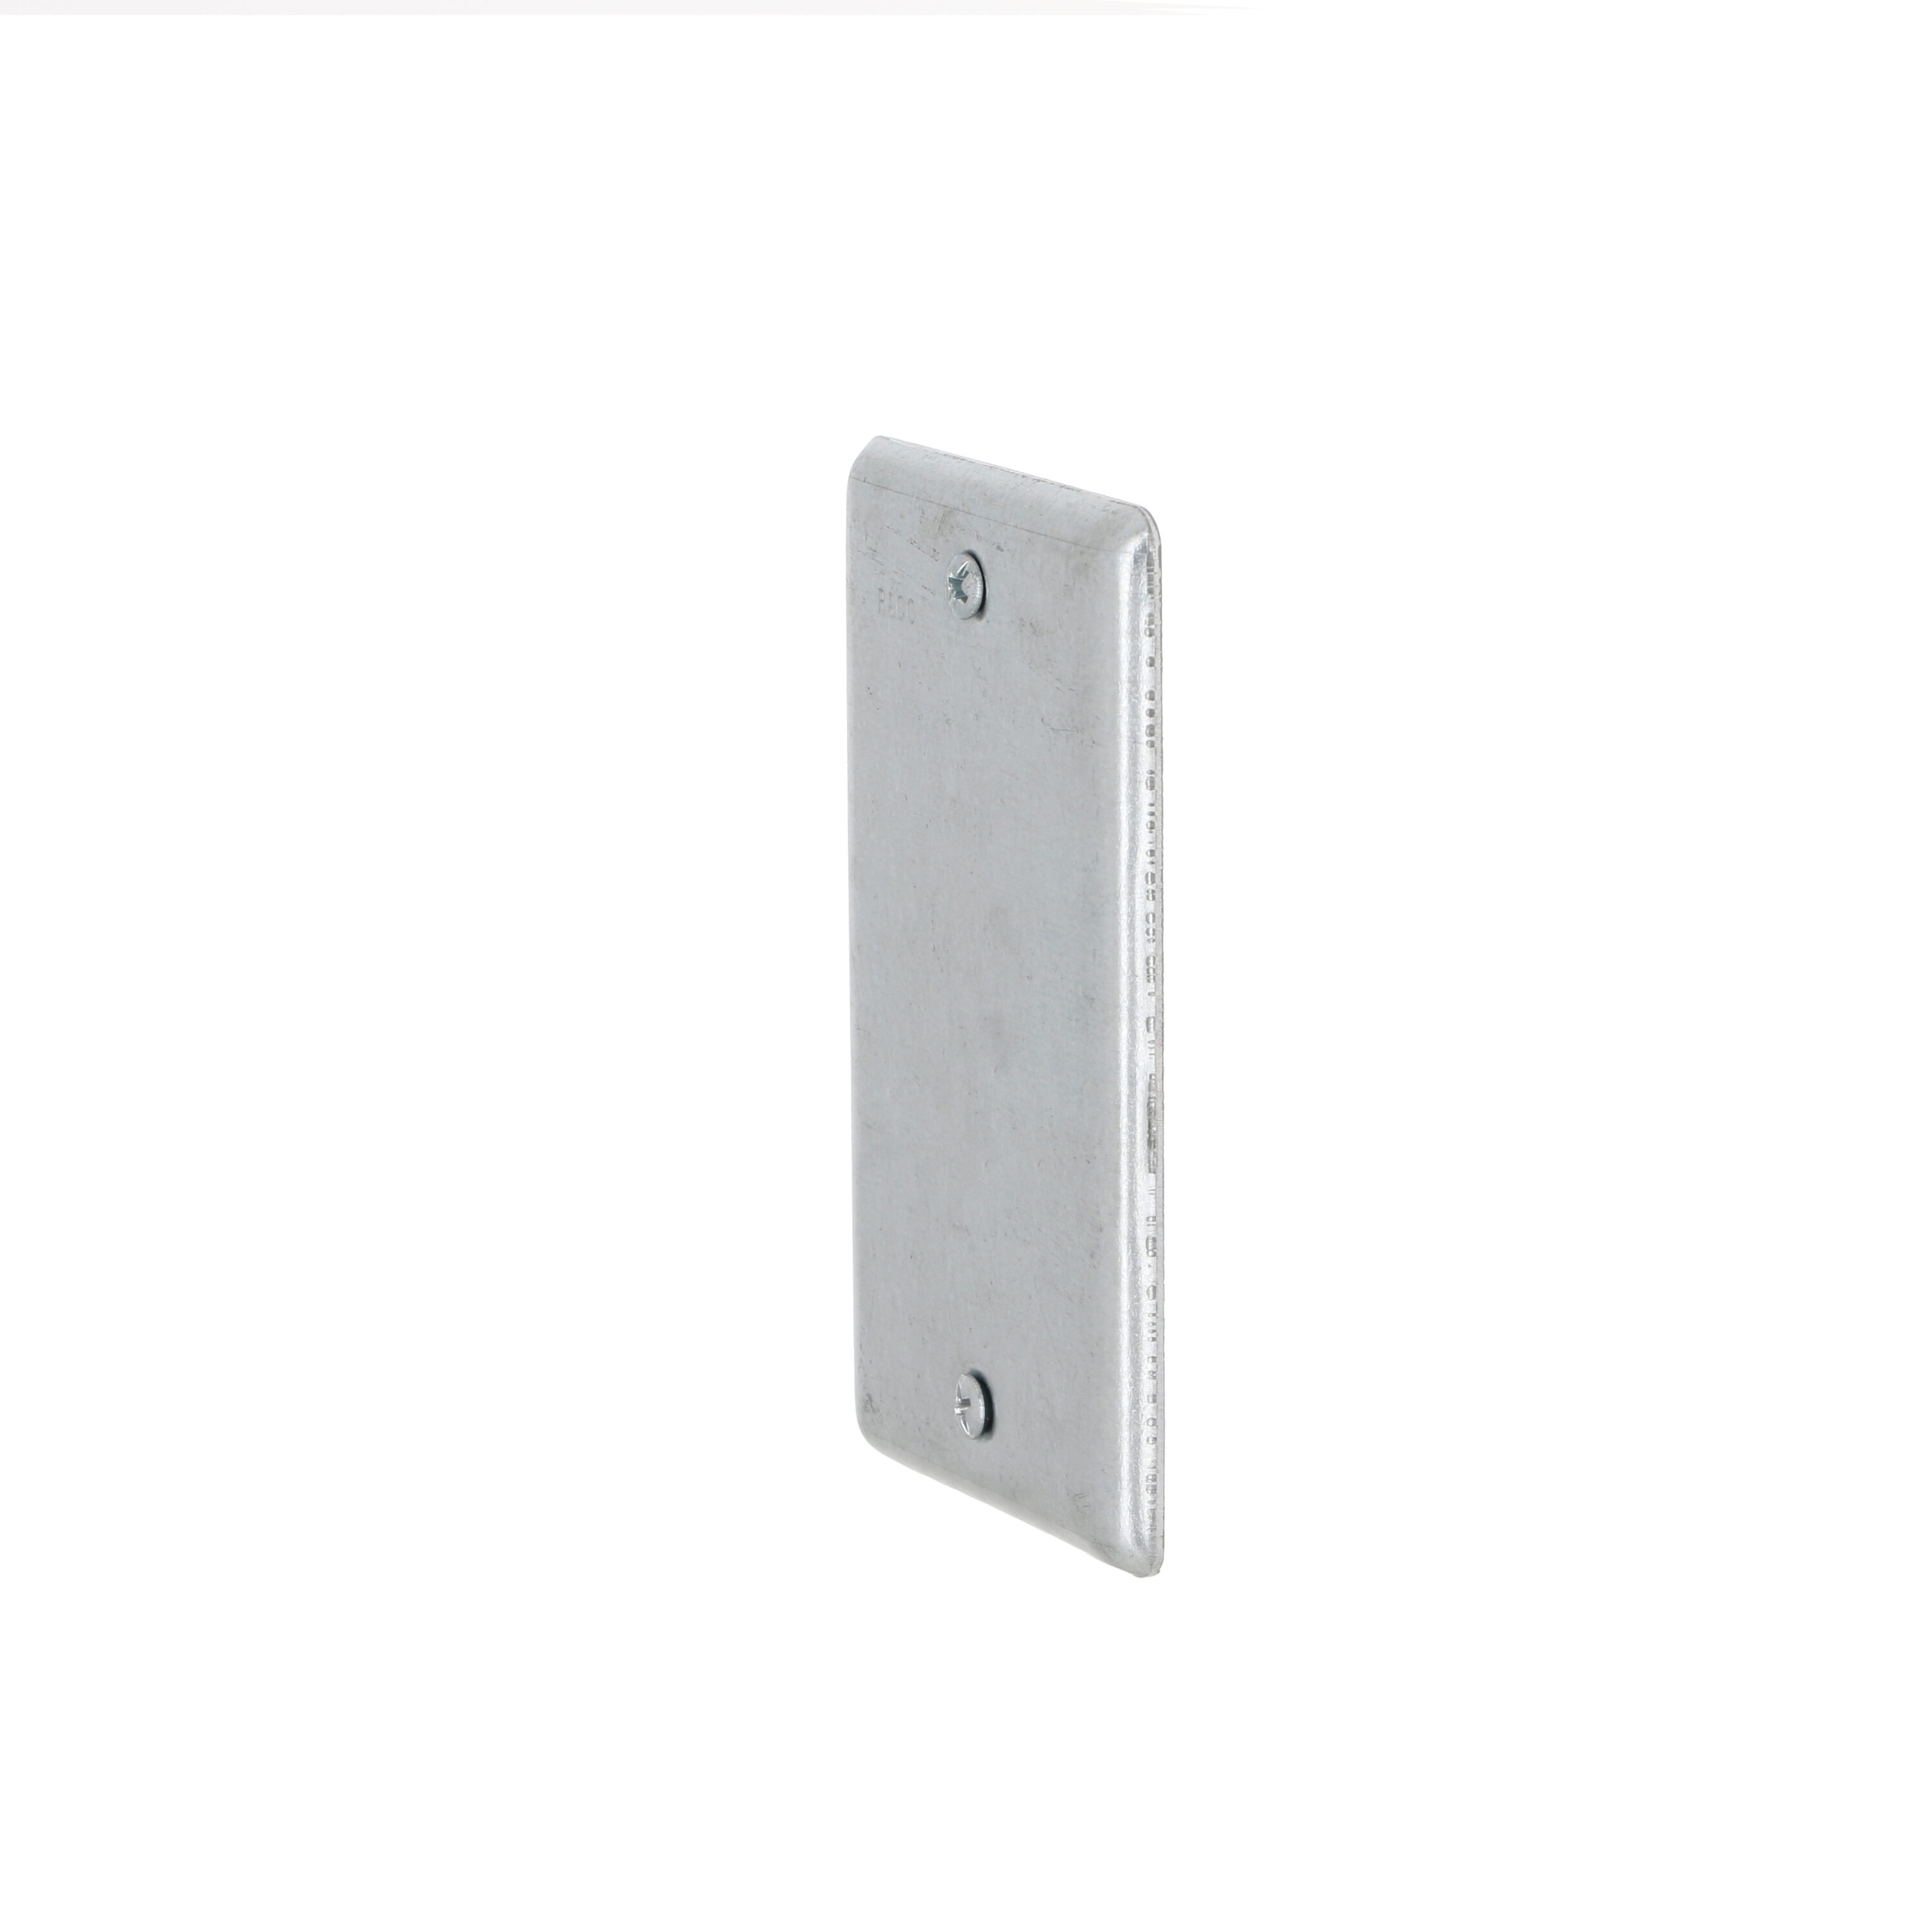 RACO 1-Gang Metal Electrical Box Cover, Rectangle